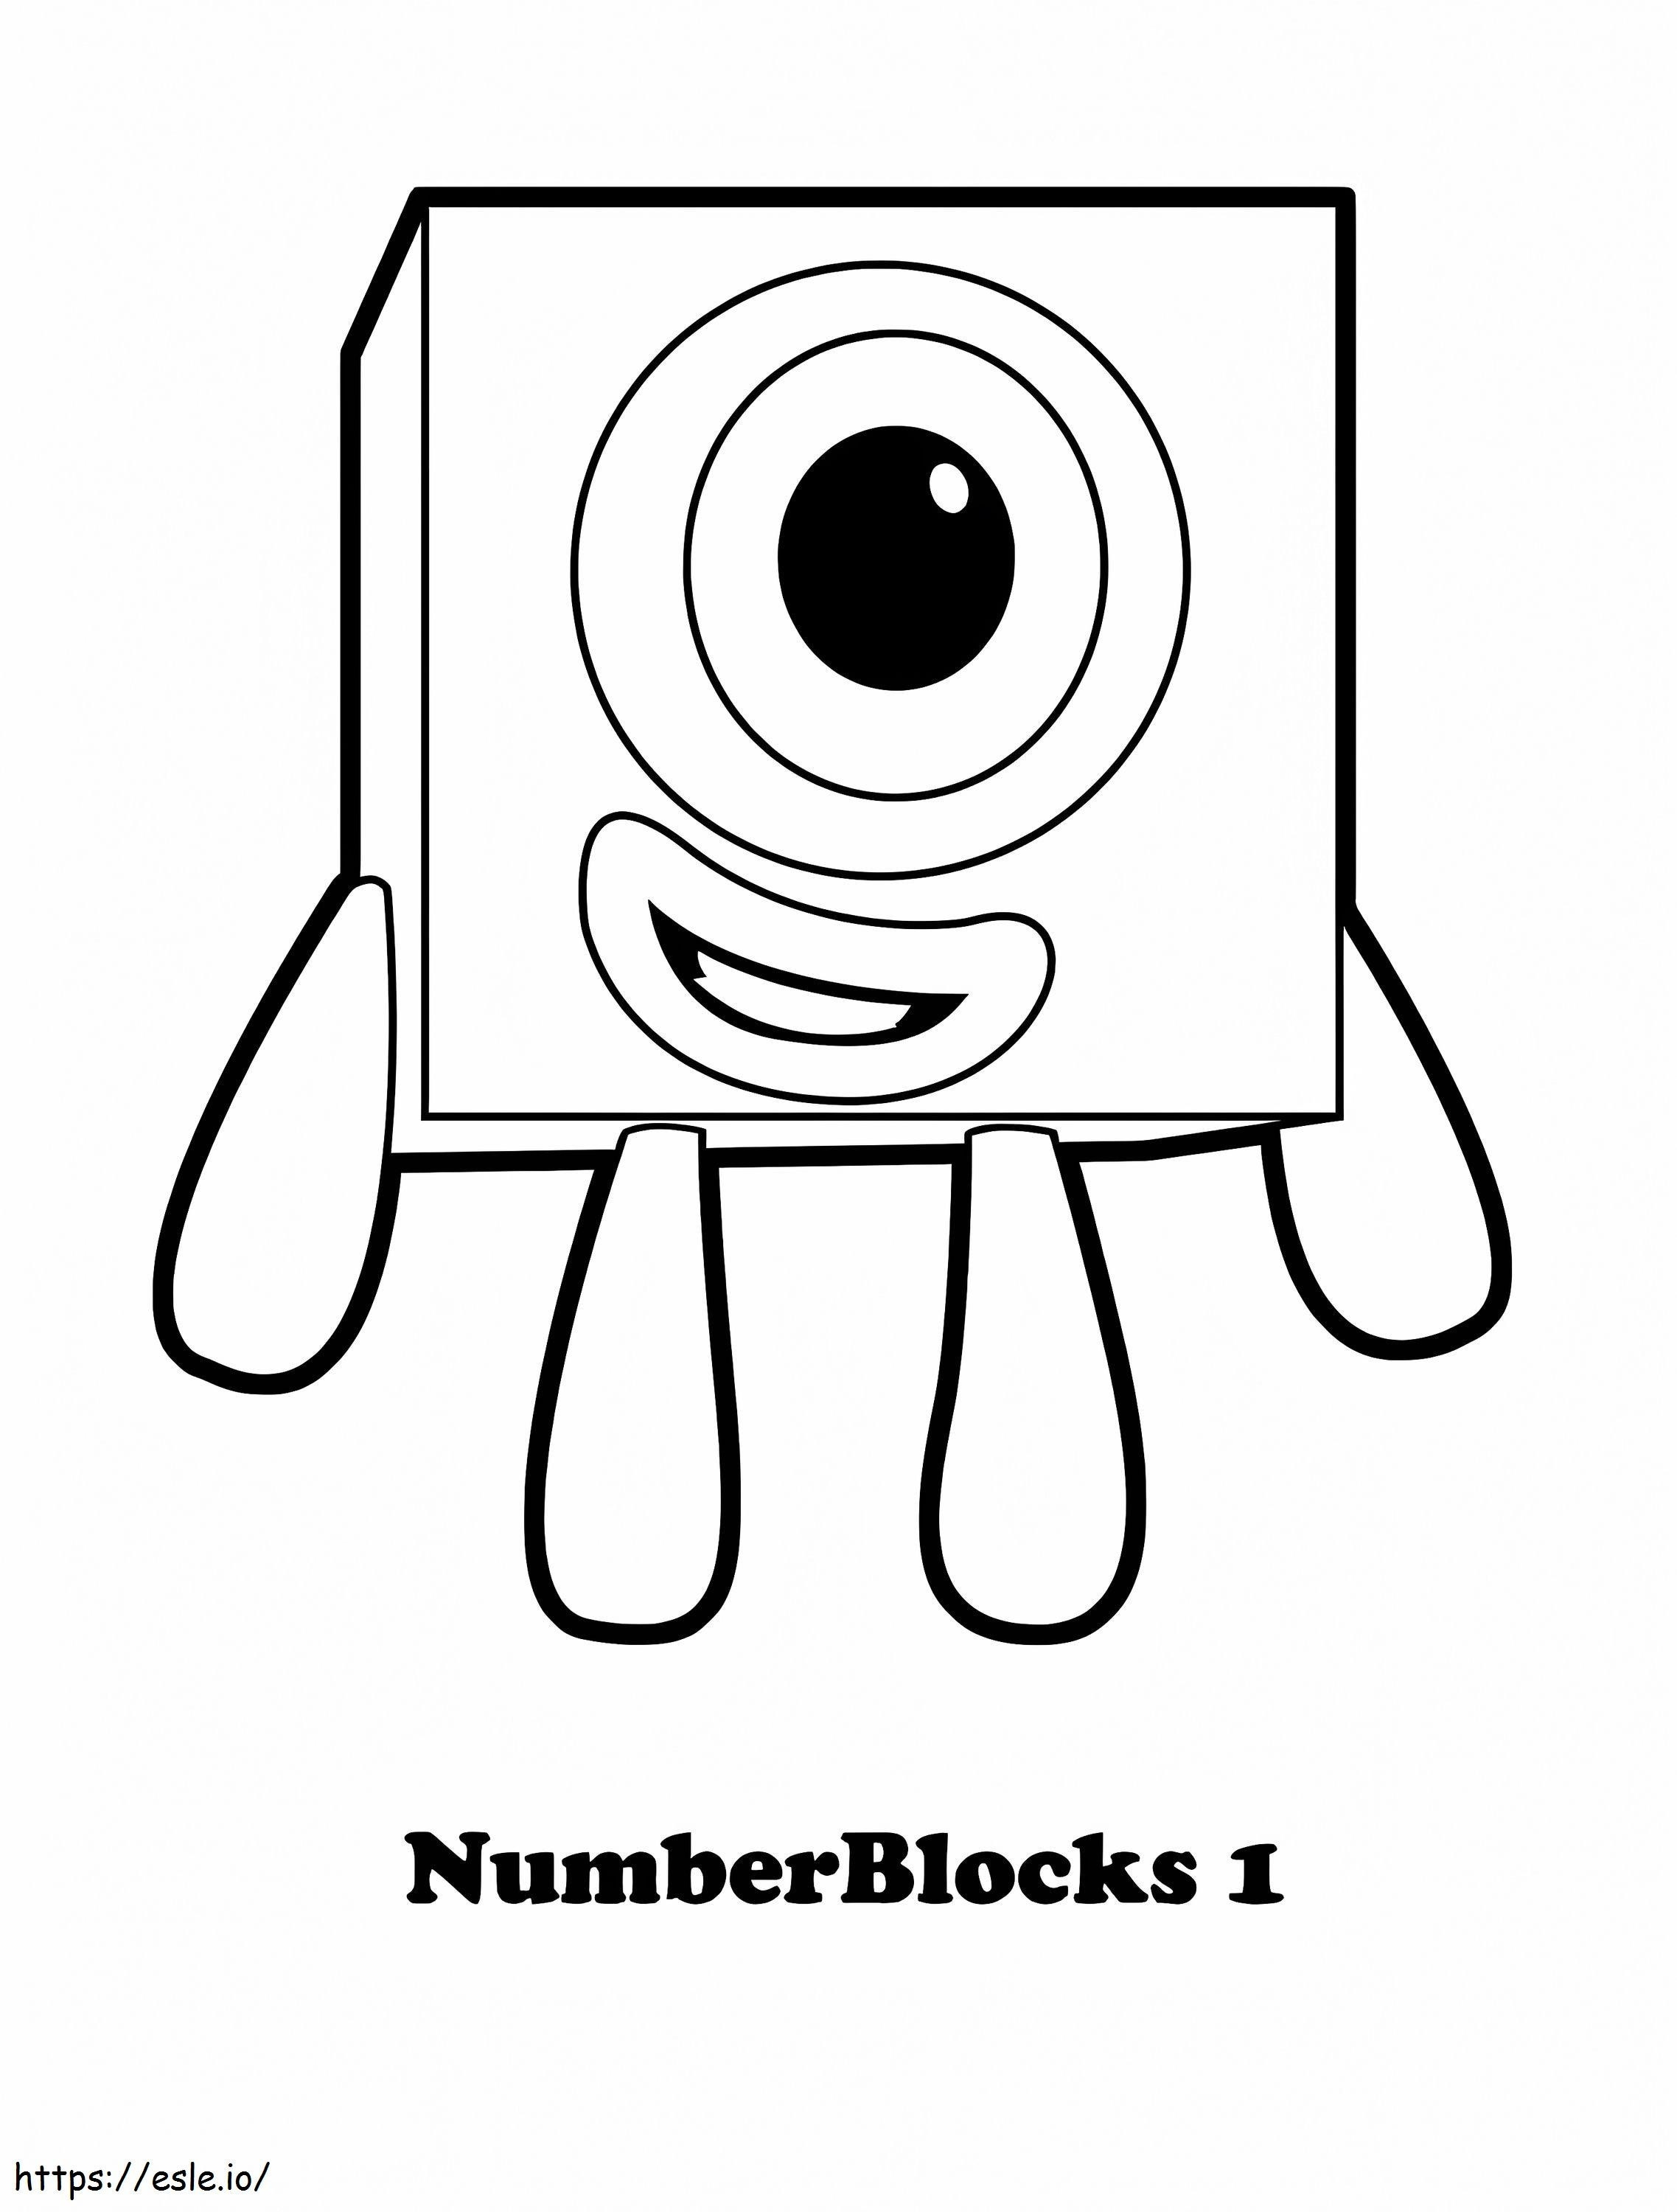 Number Blocks 1 coloring page